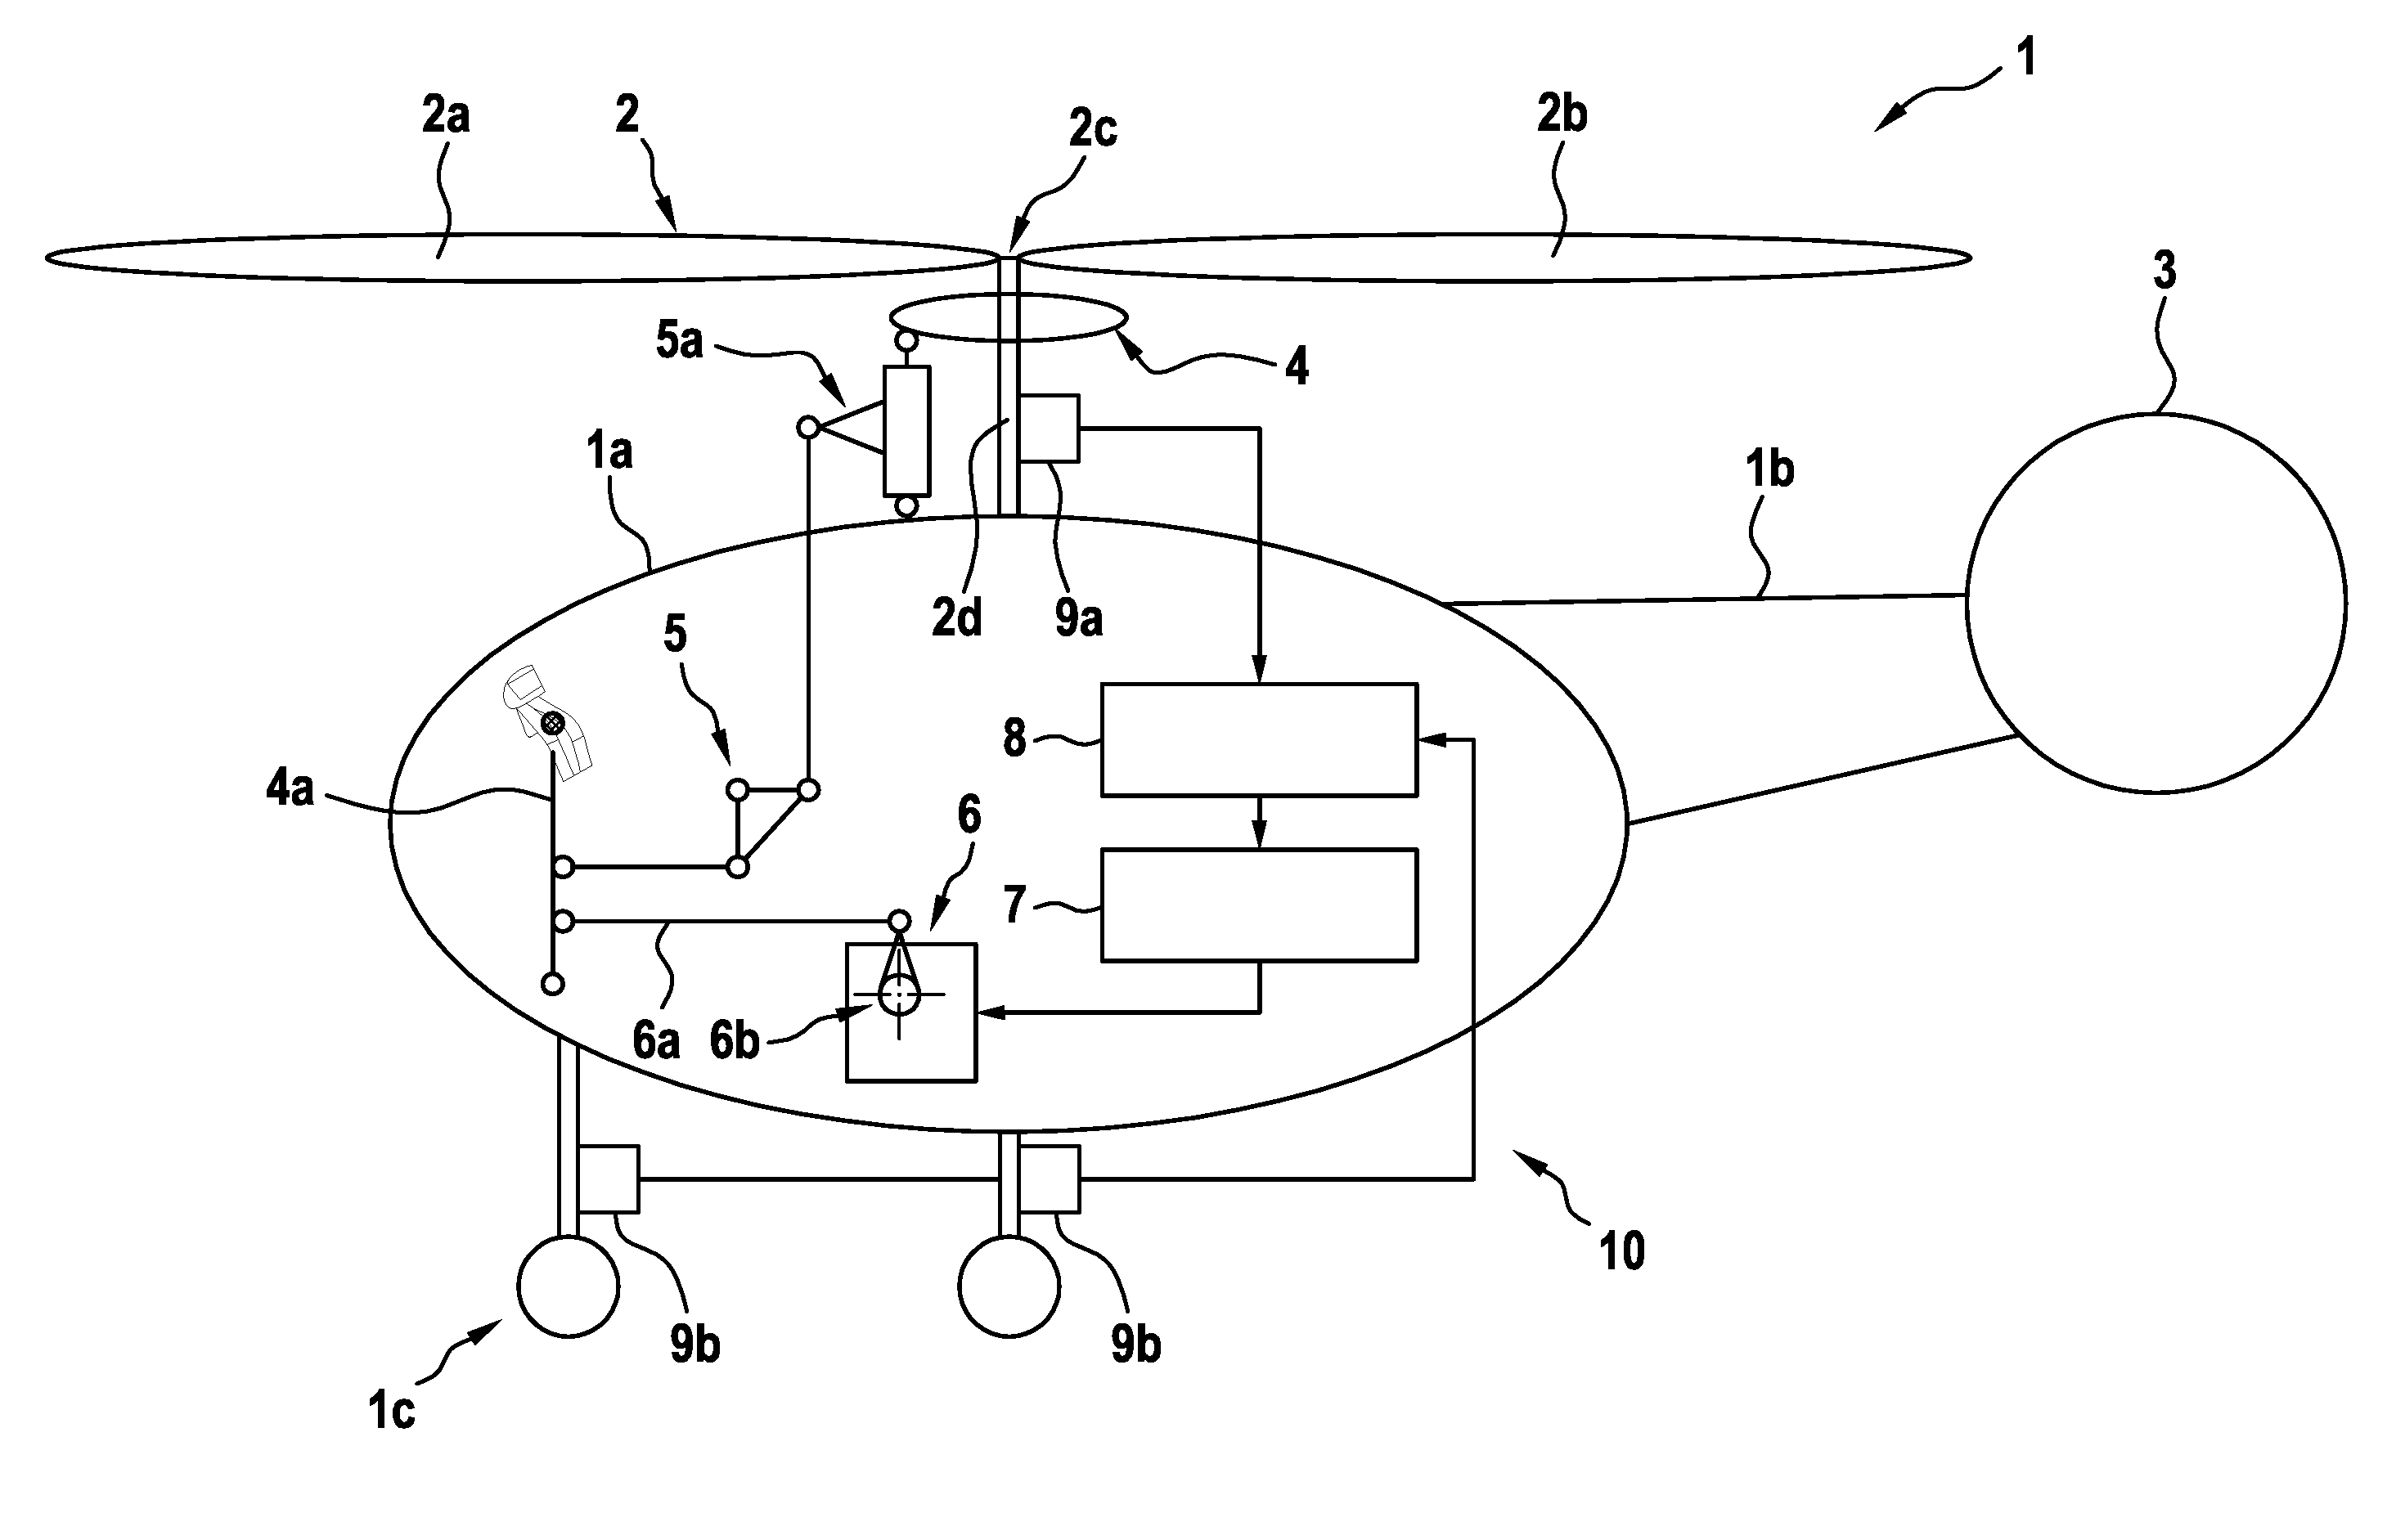 Artificial force feel generating device for a vehicle control system of a vehicle and, in particular, of an aircraft